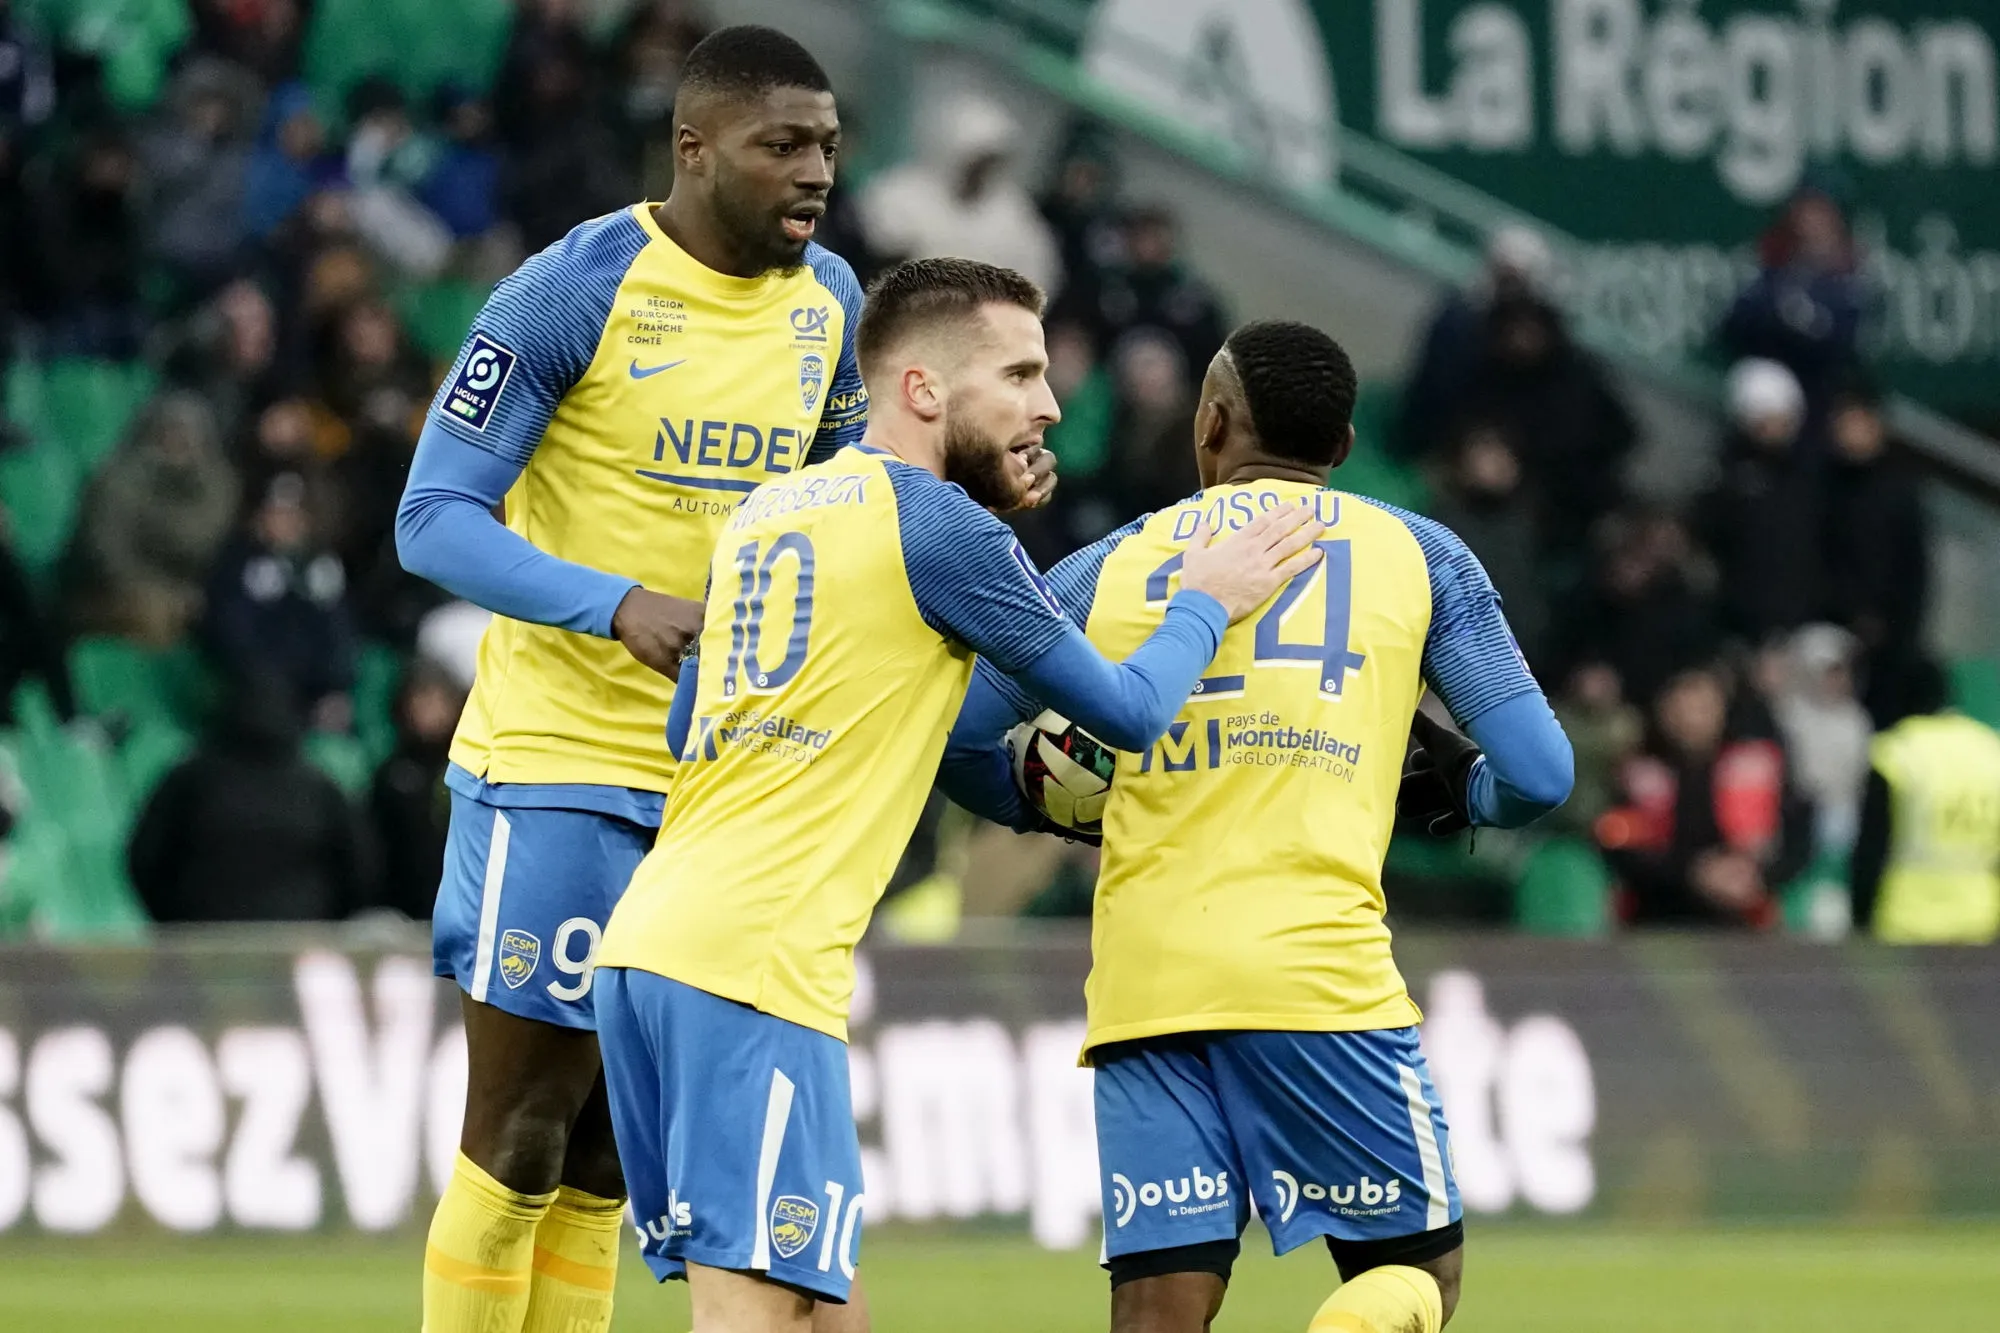 09 Ibrahim SISSOKO (fcsm) - 10 Gaetan WEISSBECK (fcsm) - 24 Jodel DOSSOU (fcsm) during the Ligue 2 BKT match between Saint Etienne and Sochaux at Stade Geoffroy-Guichard on January 28, 2023 in Saint-Etienne, France. (Photo by Dave Winter/FEP/Icon Sport)